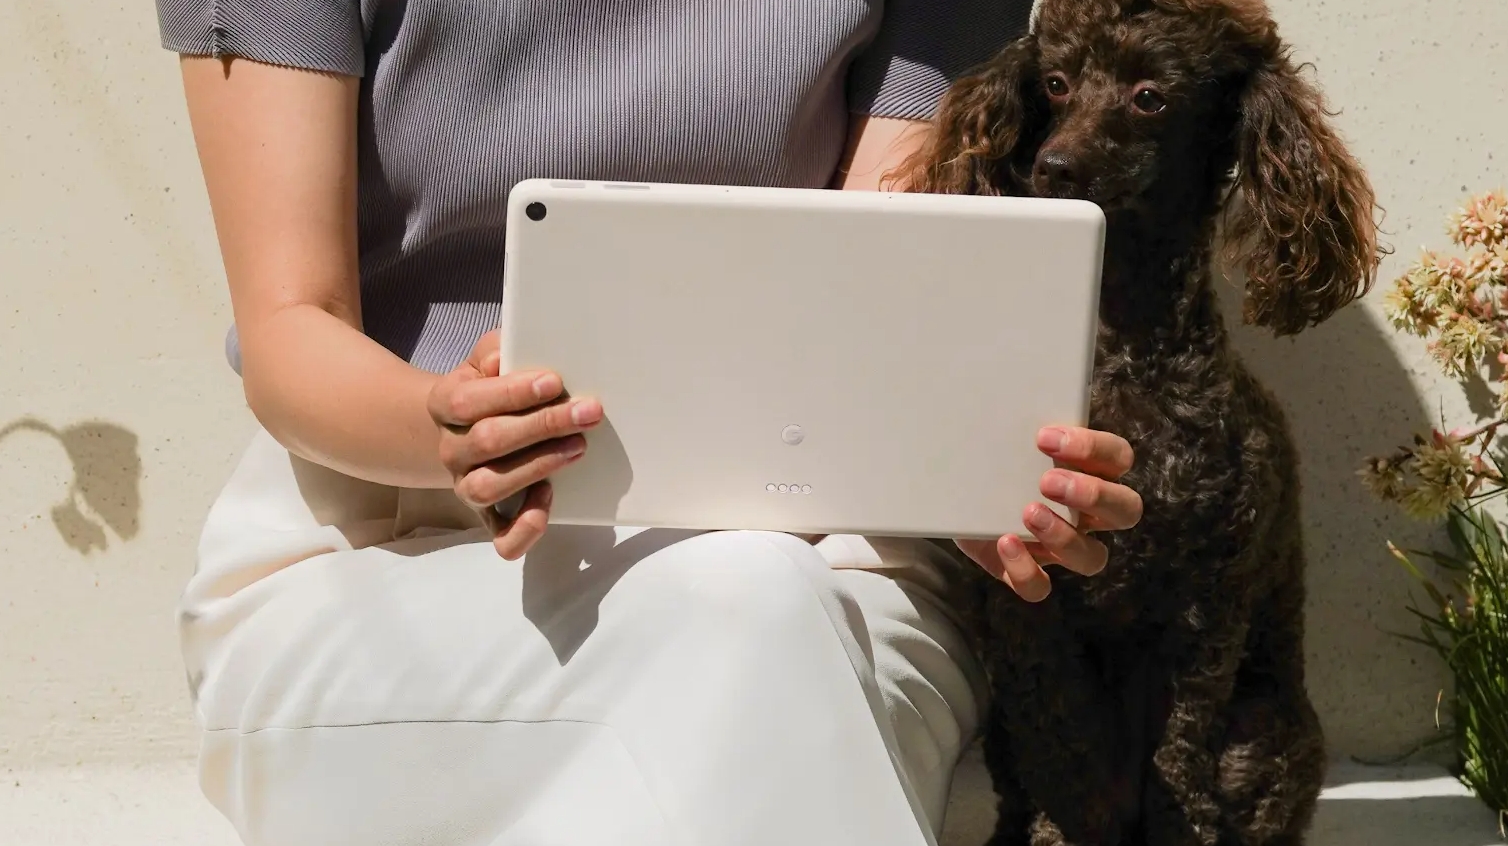 A picture of a Pixel tablet in someone's hand